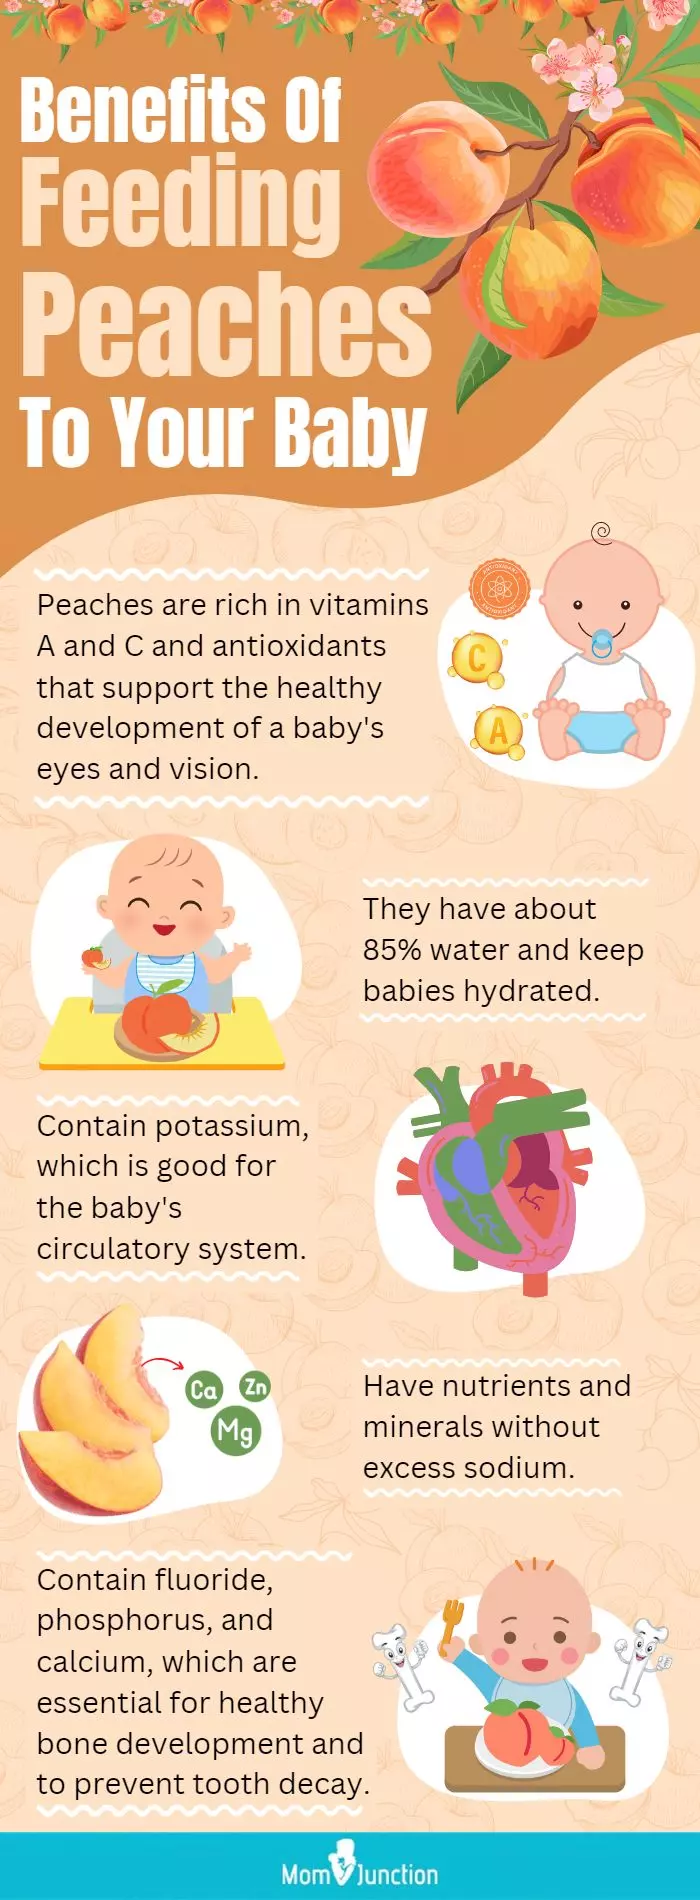 benefits of feeding peaches to your baby (infographic)